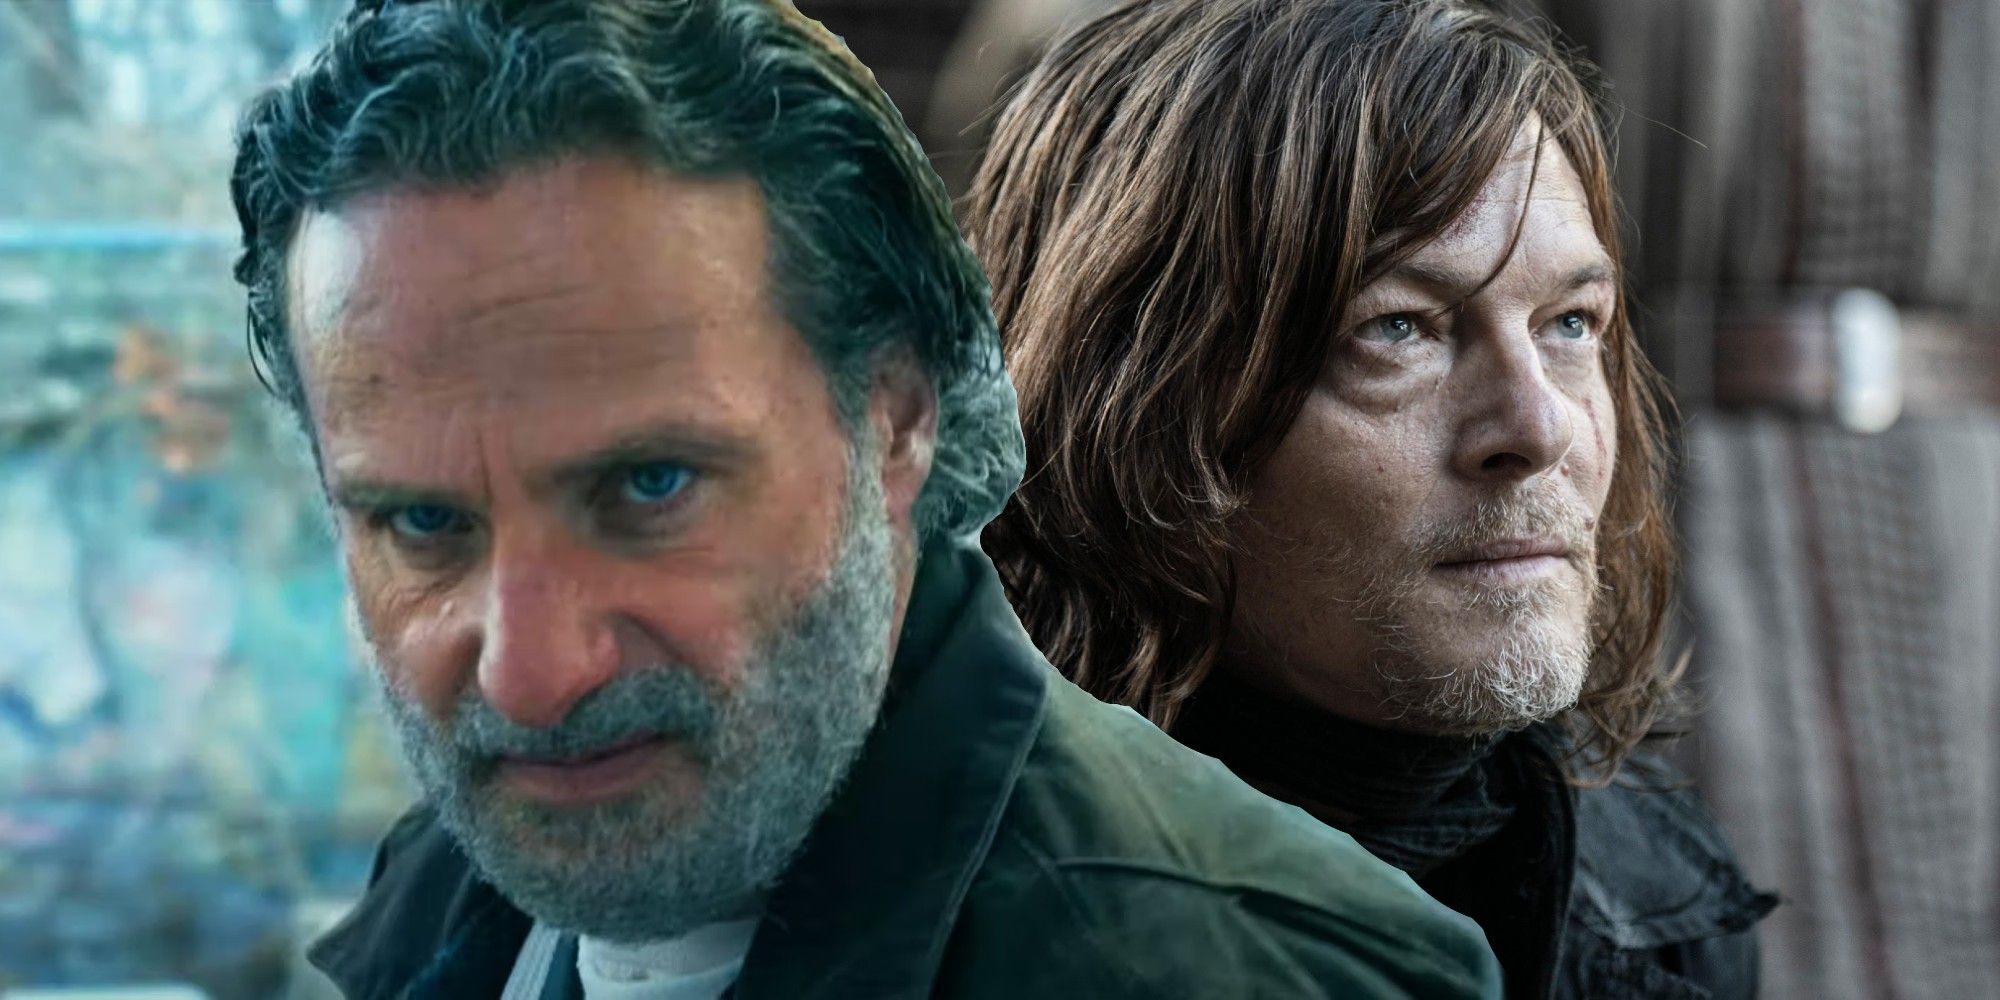 Custom image of Rick Grimes looking angry on The Walking Dead The Ones Who Live and Daryl Dixon looking up stonefaced on The Walking Dead Daryl Dixon